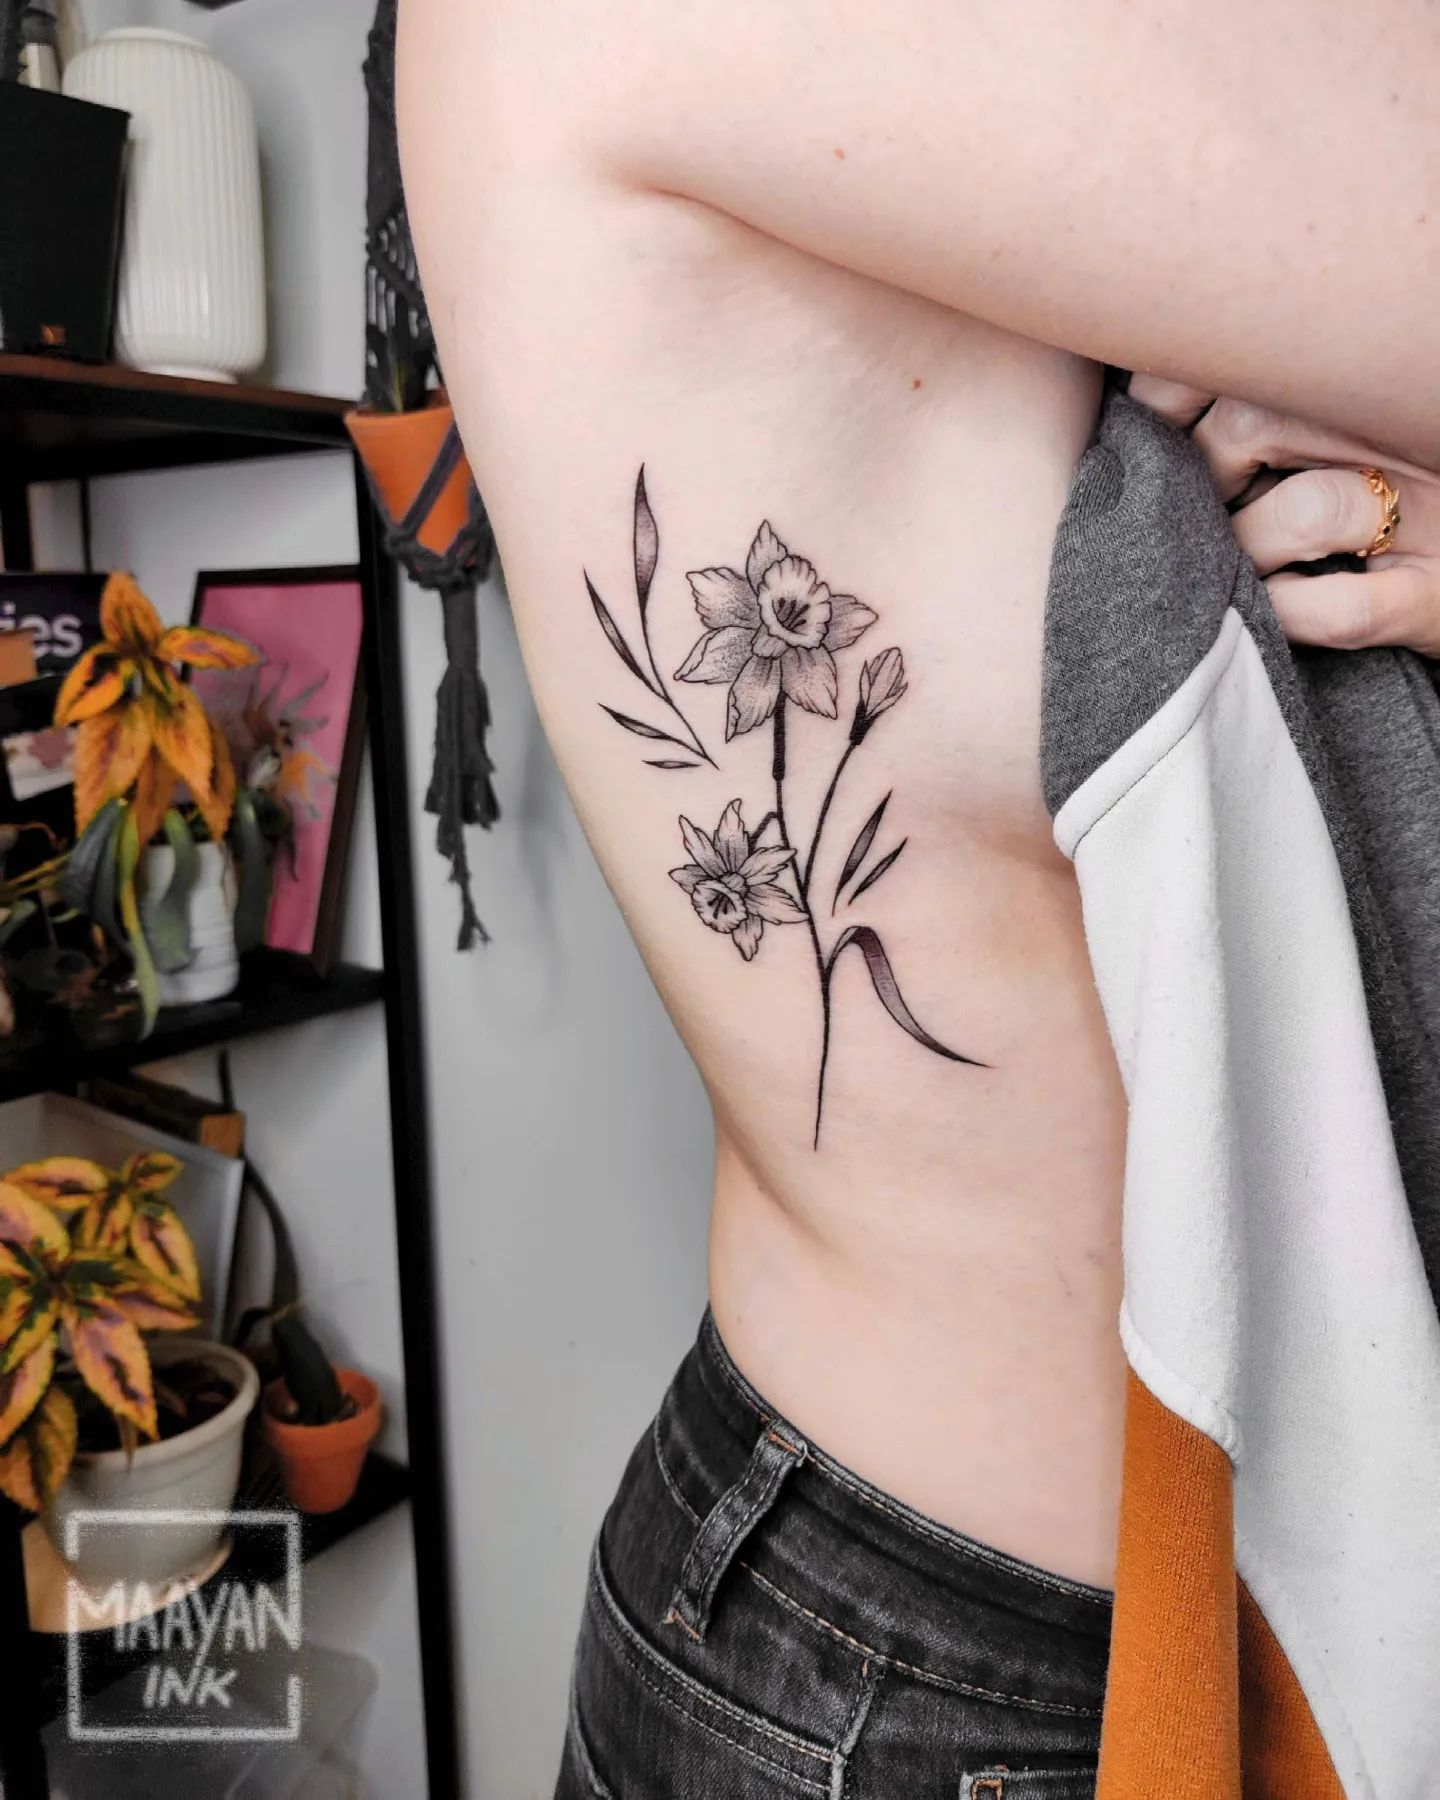 I make birth flower tattoo designs on Etsy just for you   rTattooDesigns